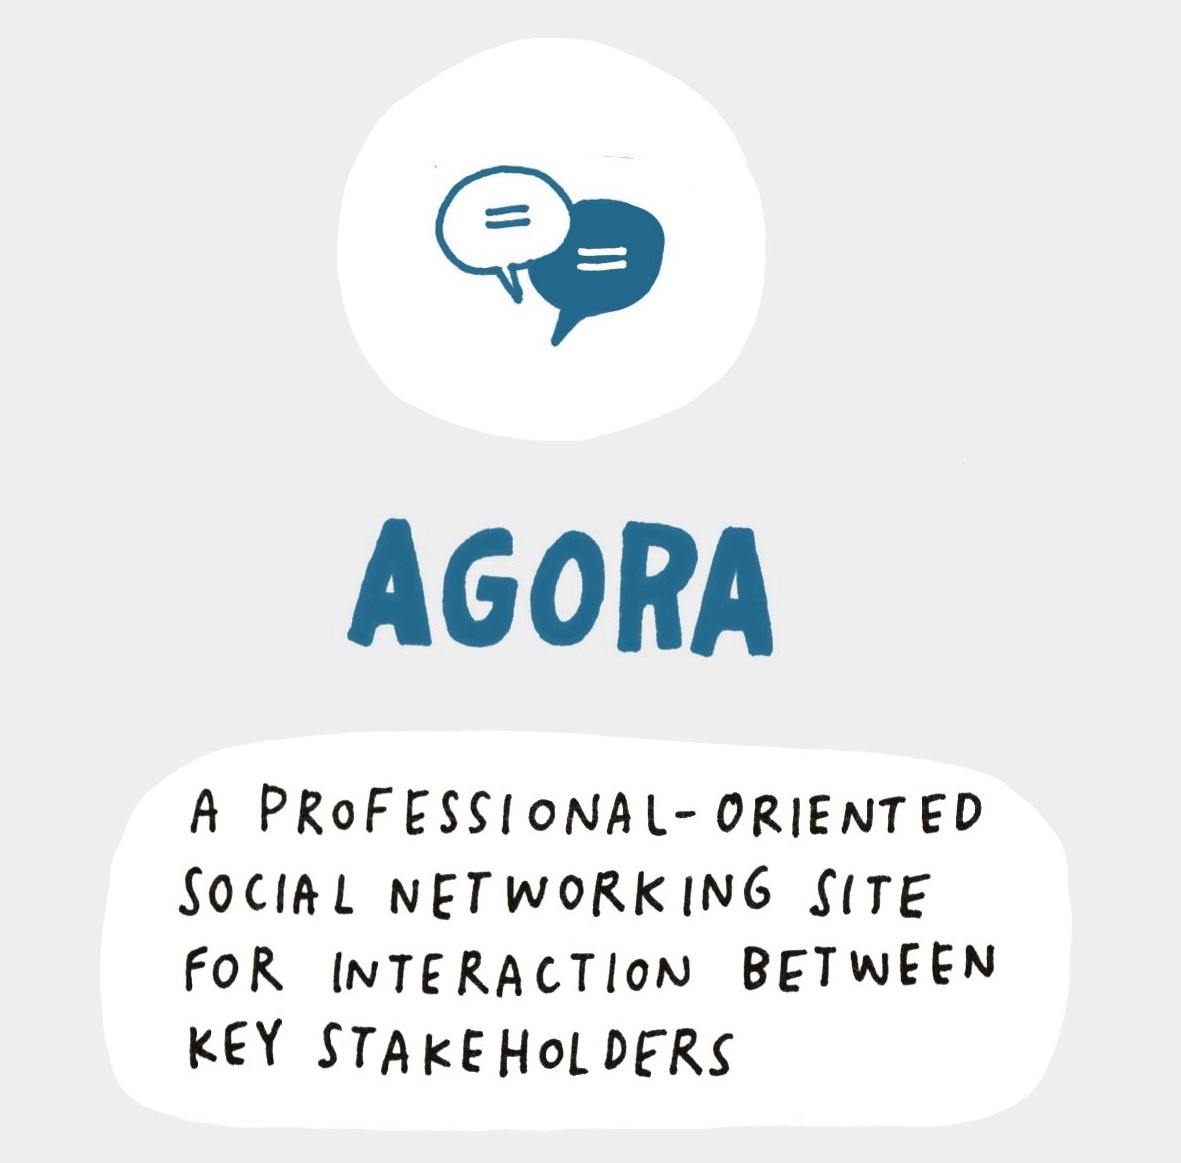 AGORA: A professional-oriented social networking site for interaction between key stakeholders